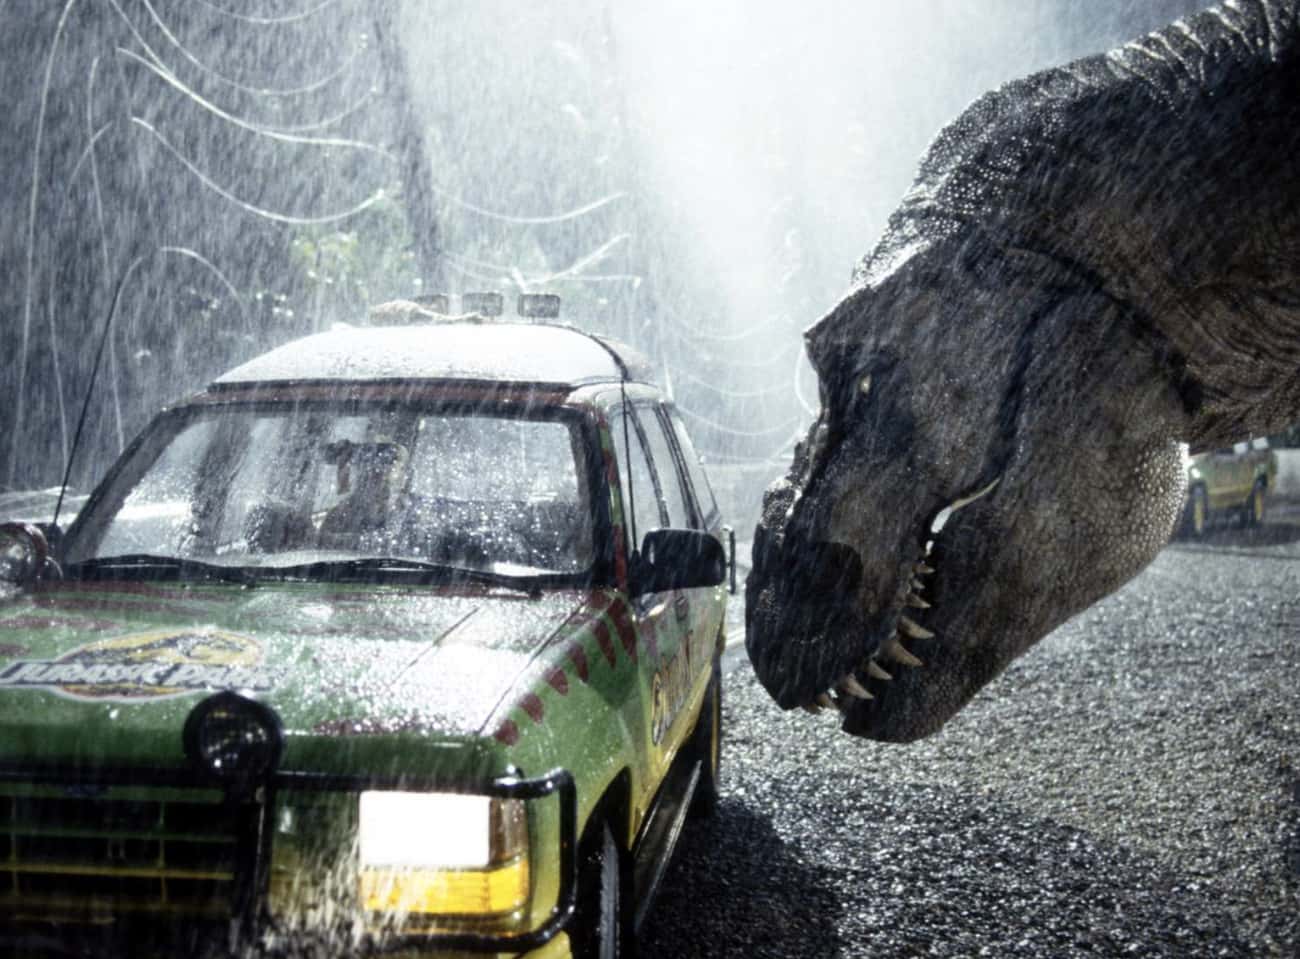 A Crew Member Was Trapped Inside The ‘Jurassic Park’ T-Rex After Power Went Out On Set 